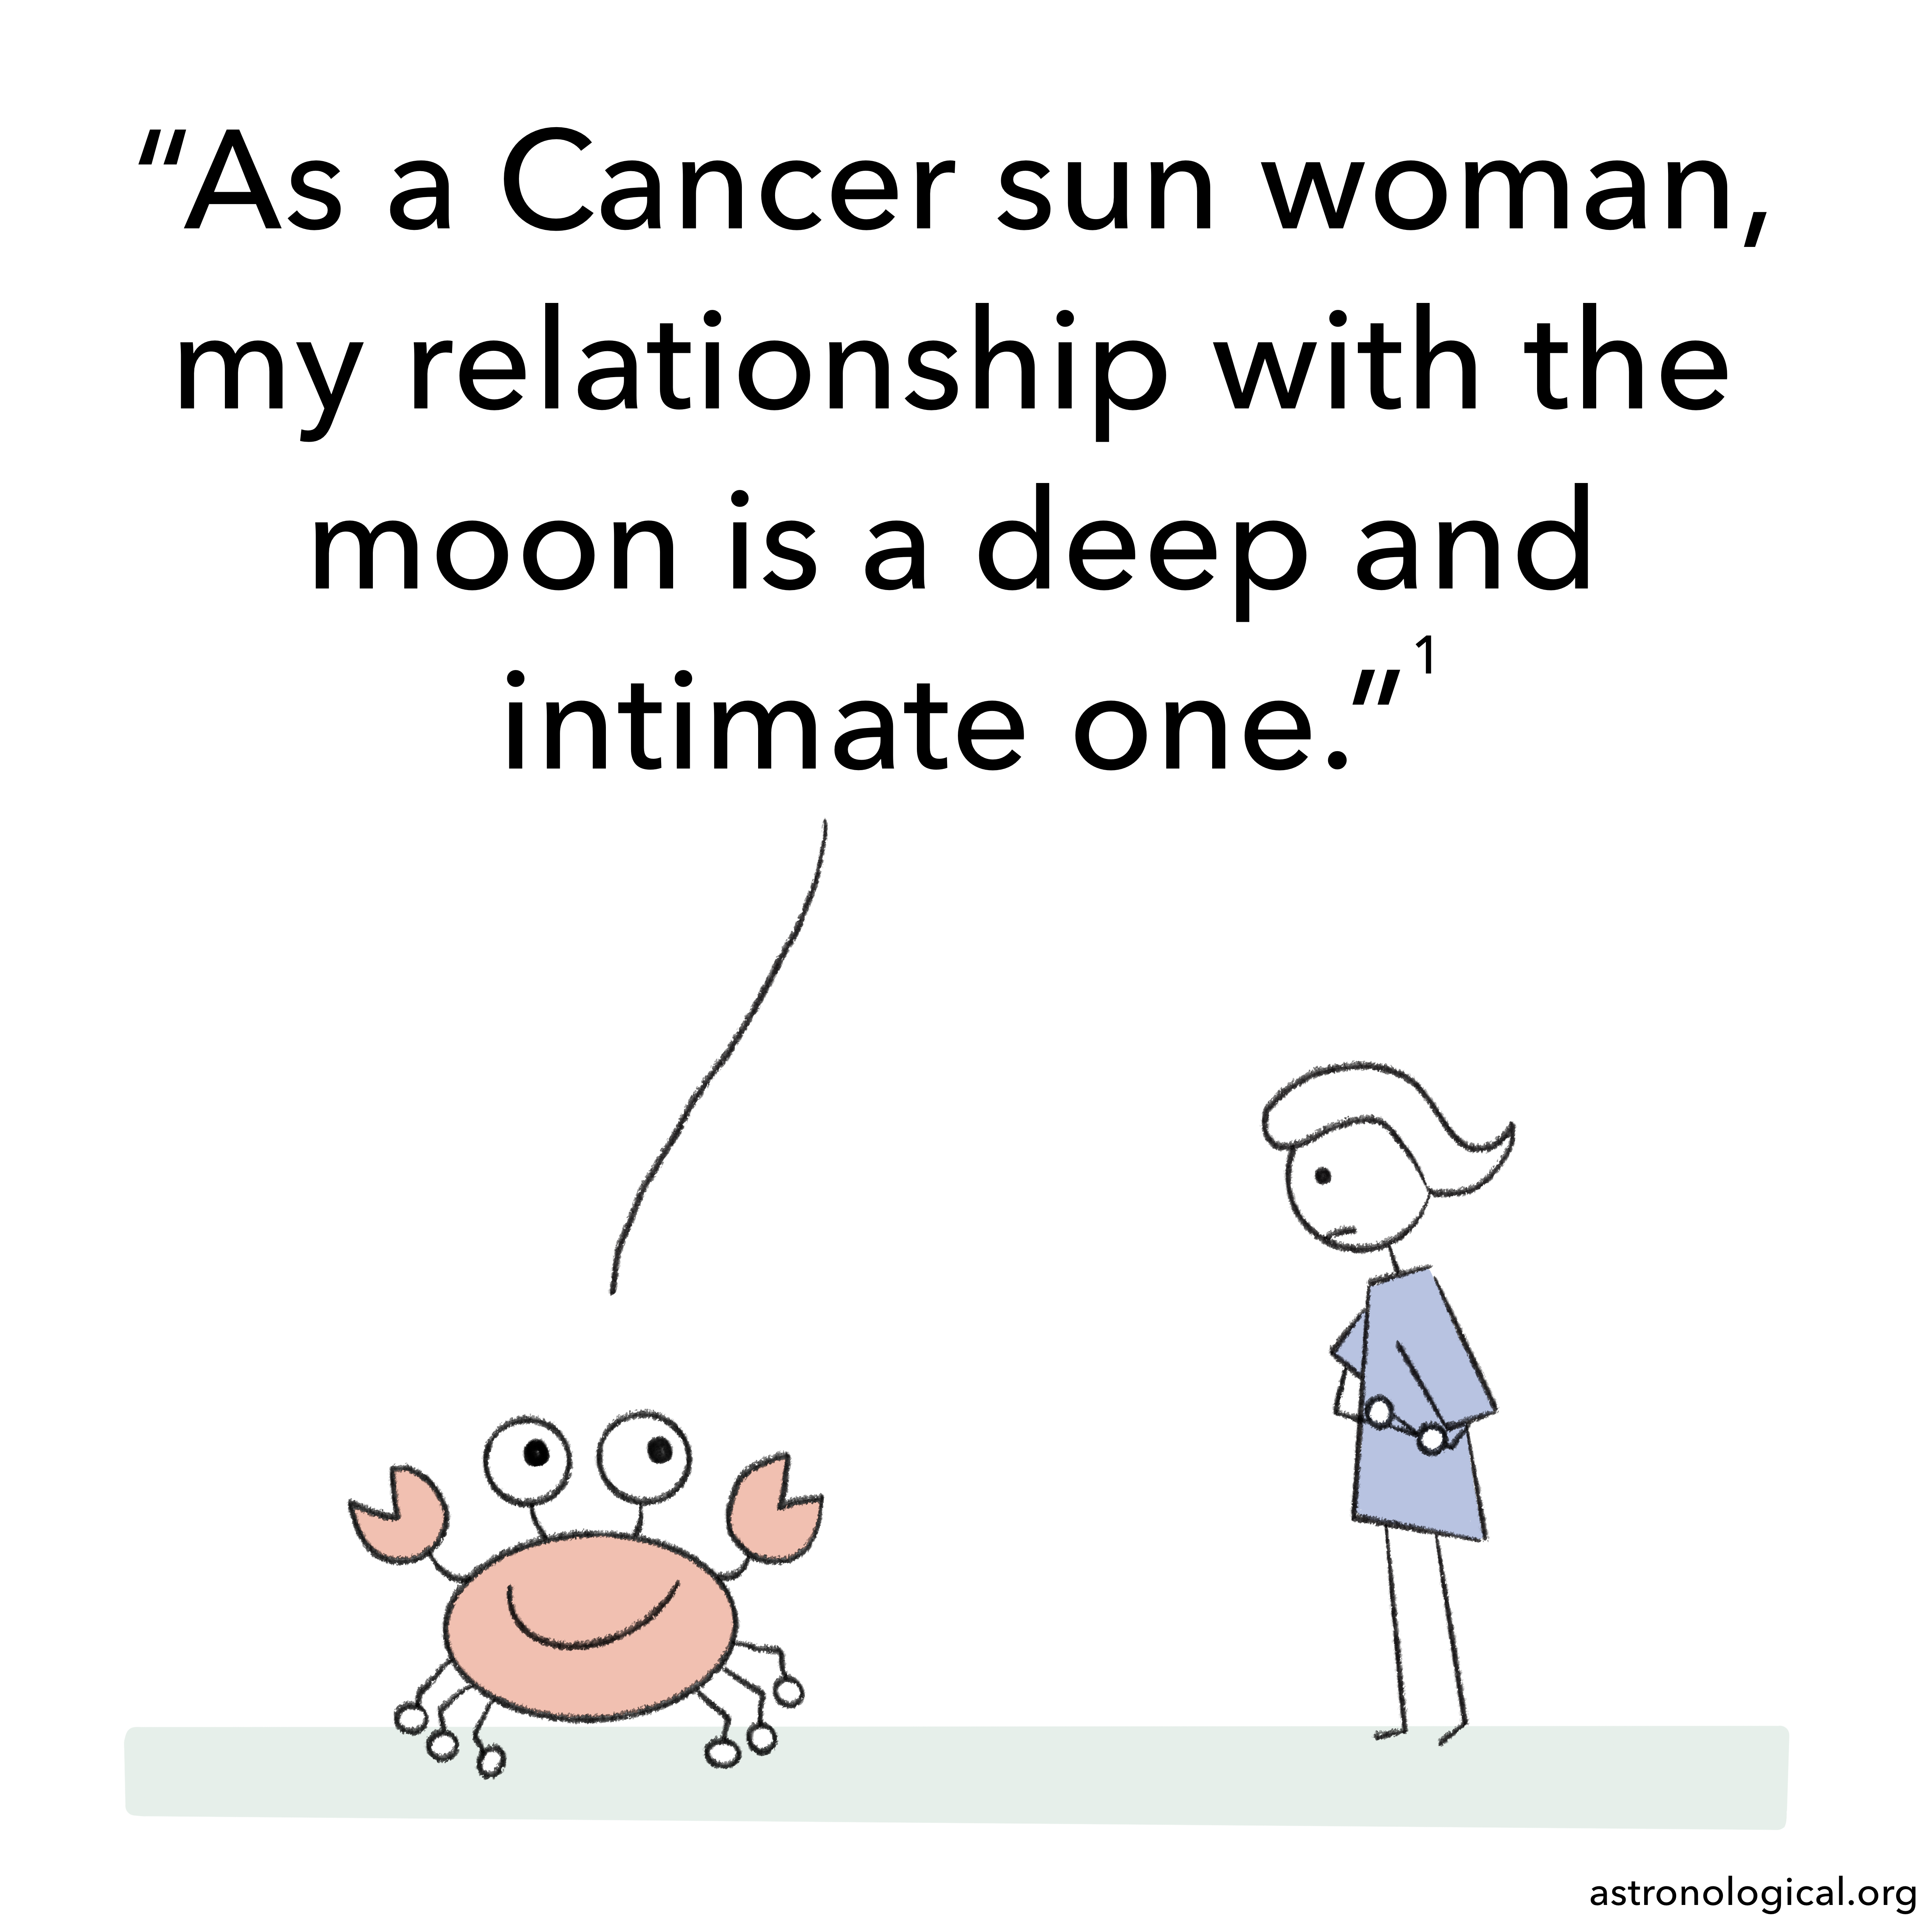 A cartoon crab is enthusiastically talking to a stick figure girl who looks a little bemused. The crabs says: As a Cancer sun woman, my relationship with the moon is a deep and intimate one.